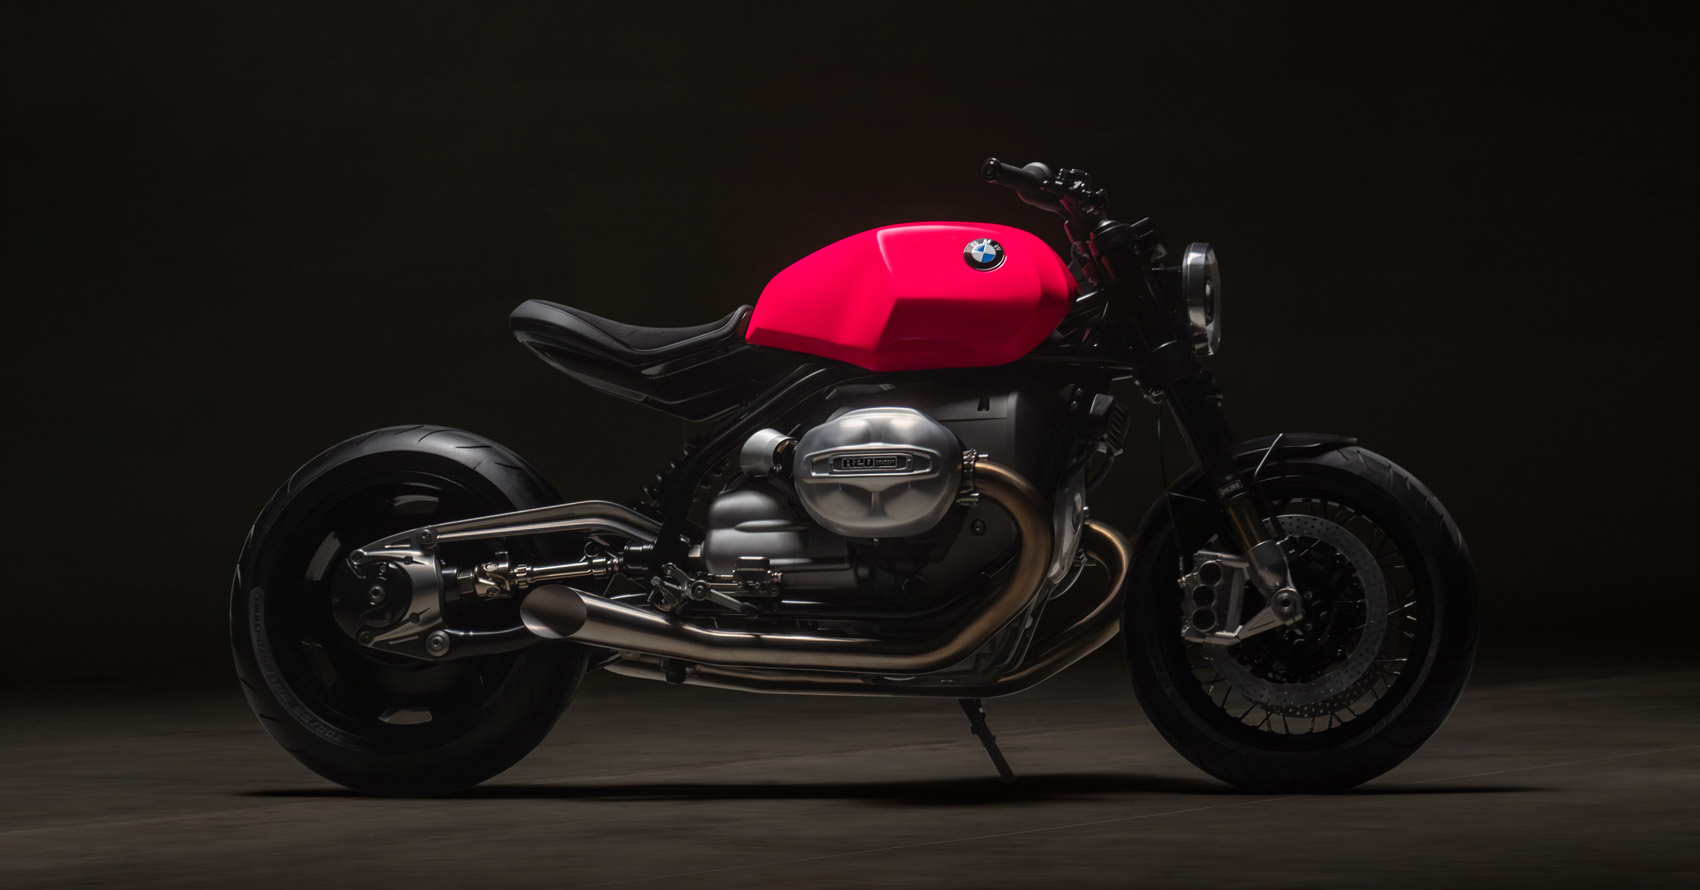 BMW R20 Concept: BMW stuns with a hot pink 2-liter boxer